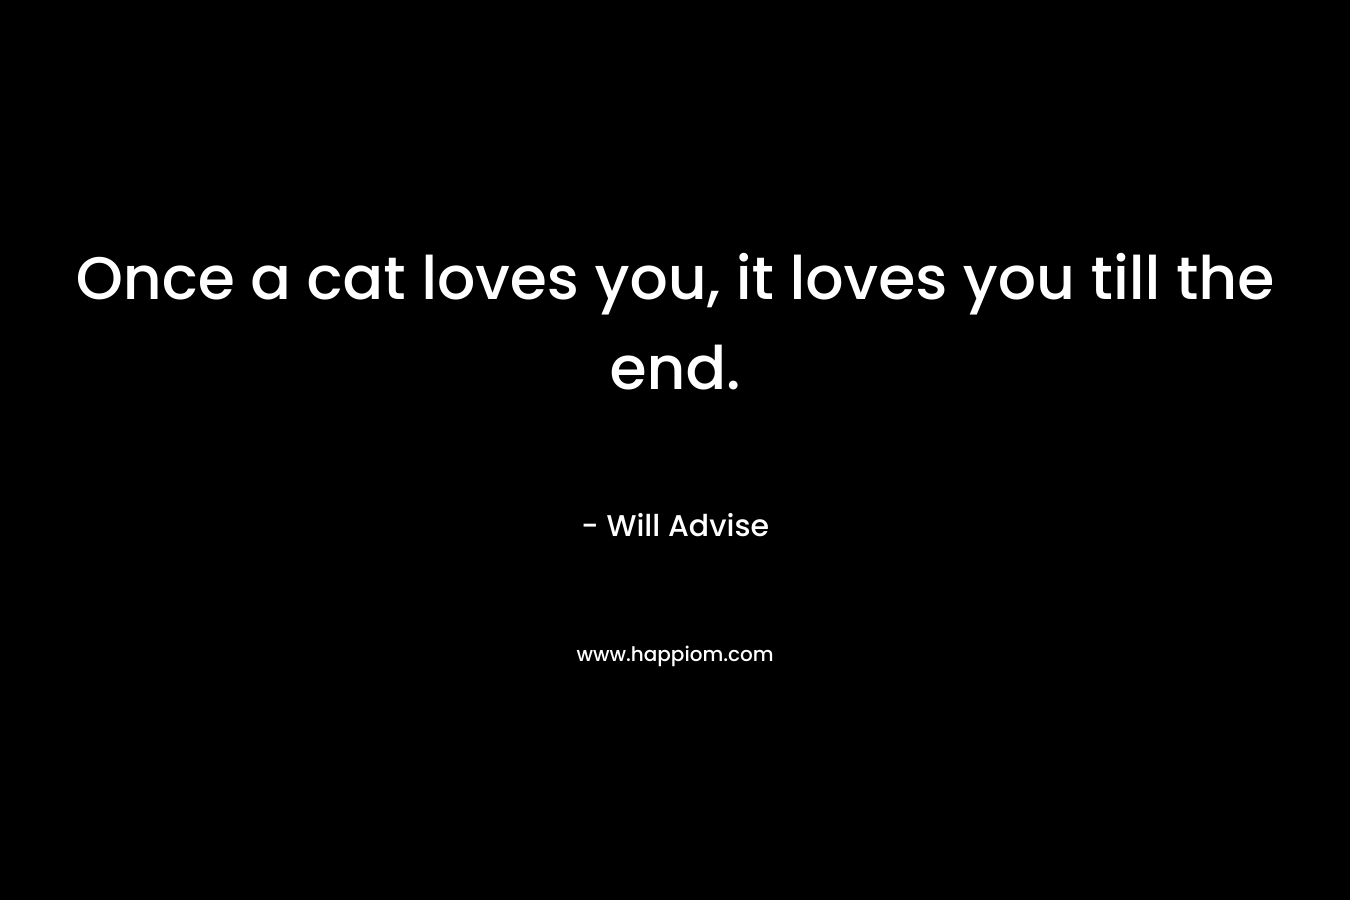 Once a cat loves you, it loves you till the end. – Will Advise